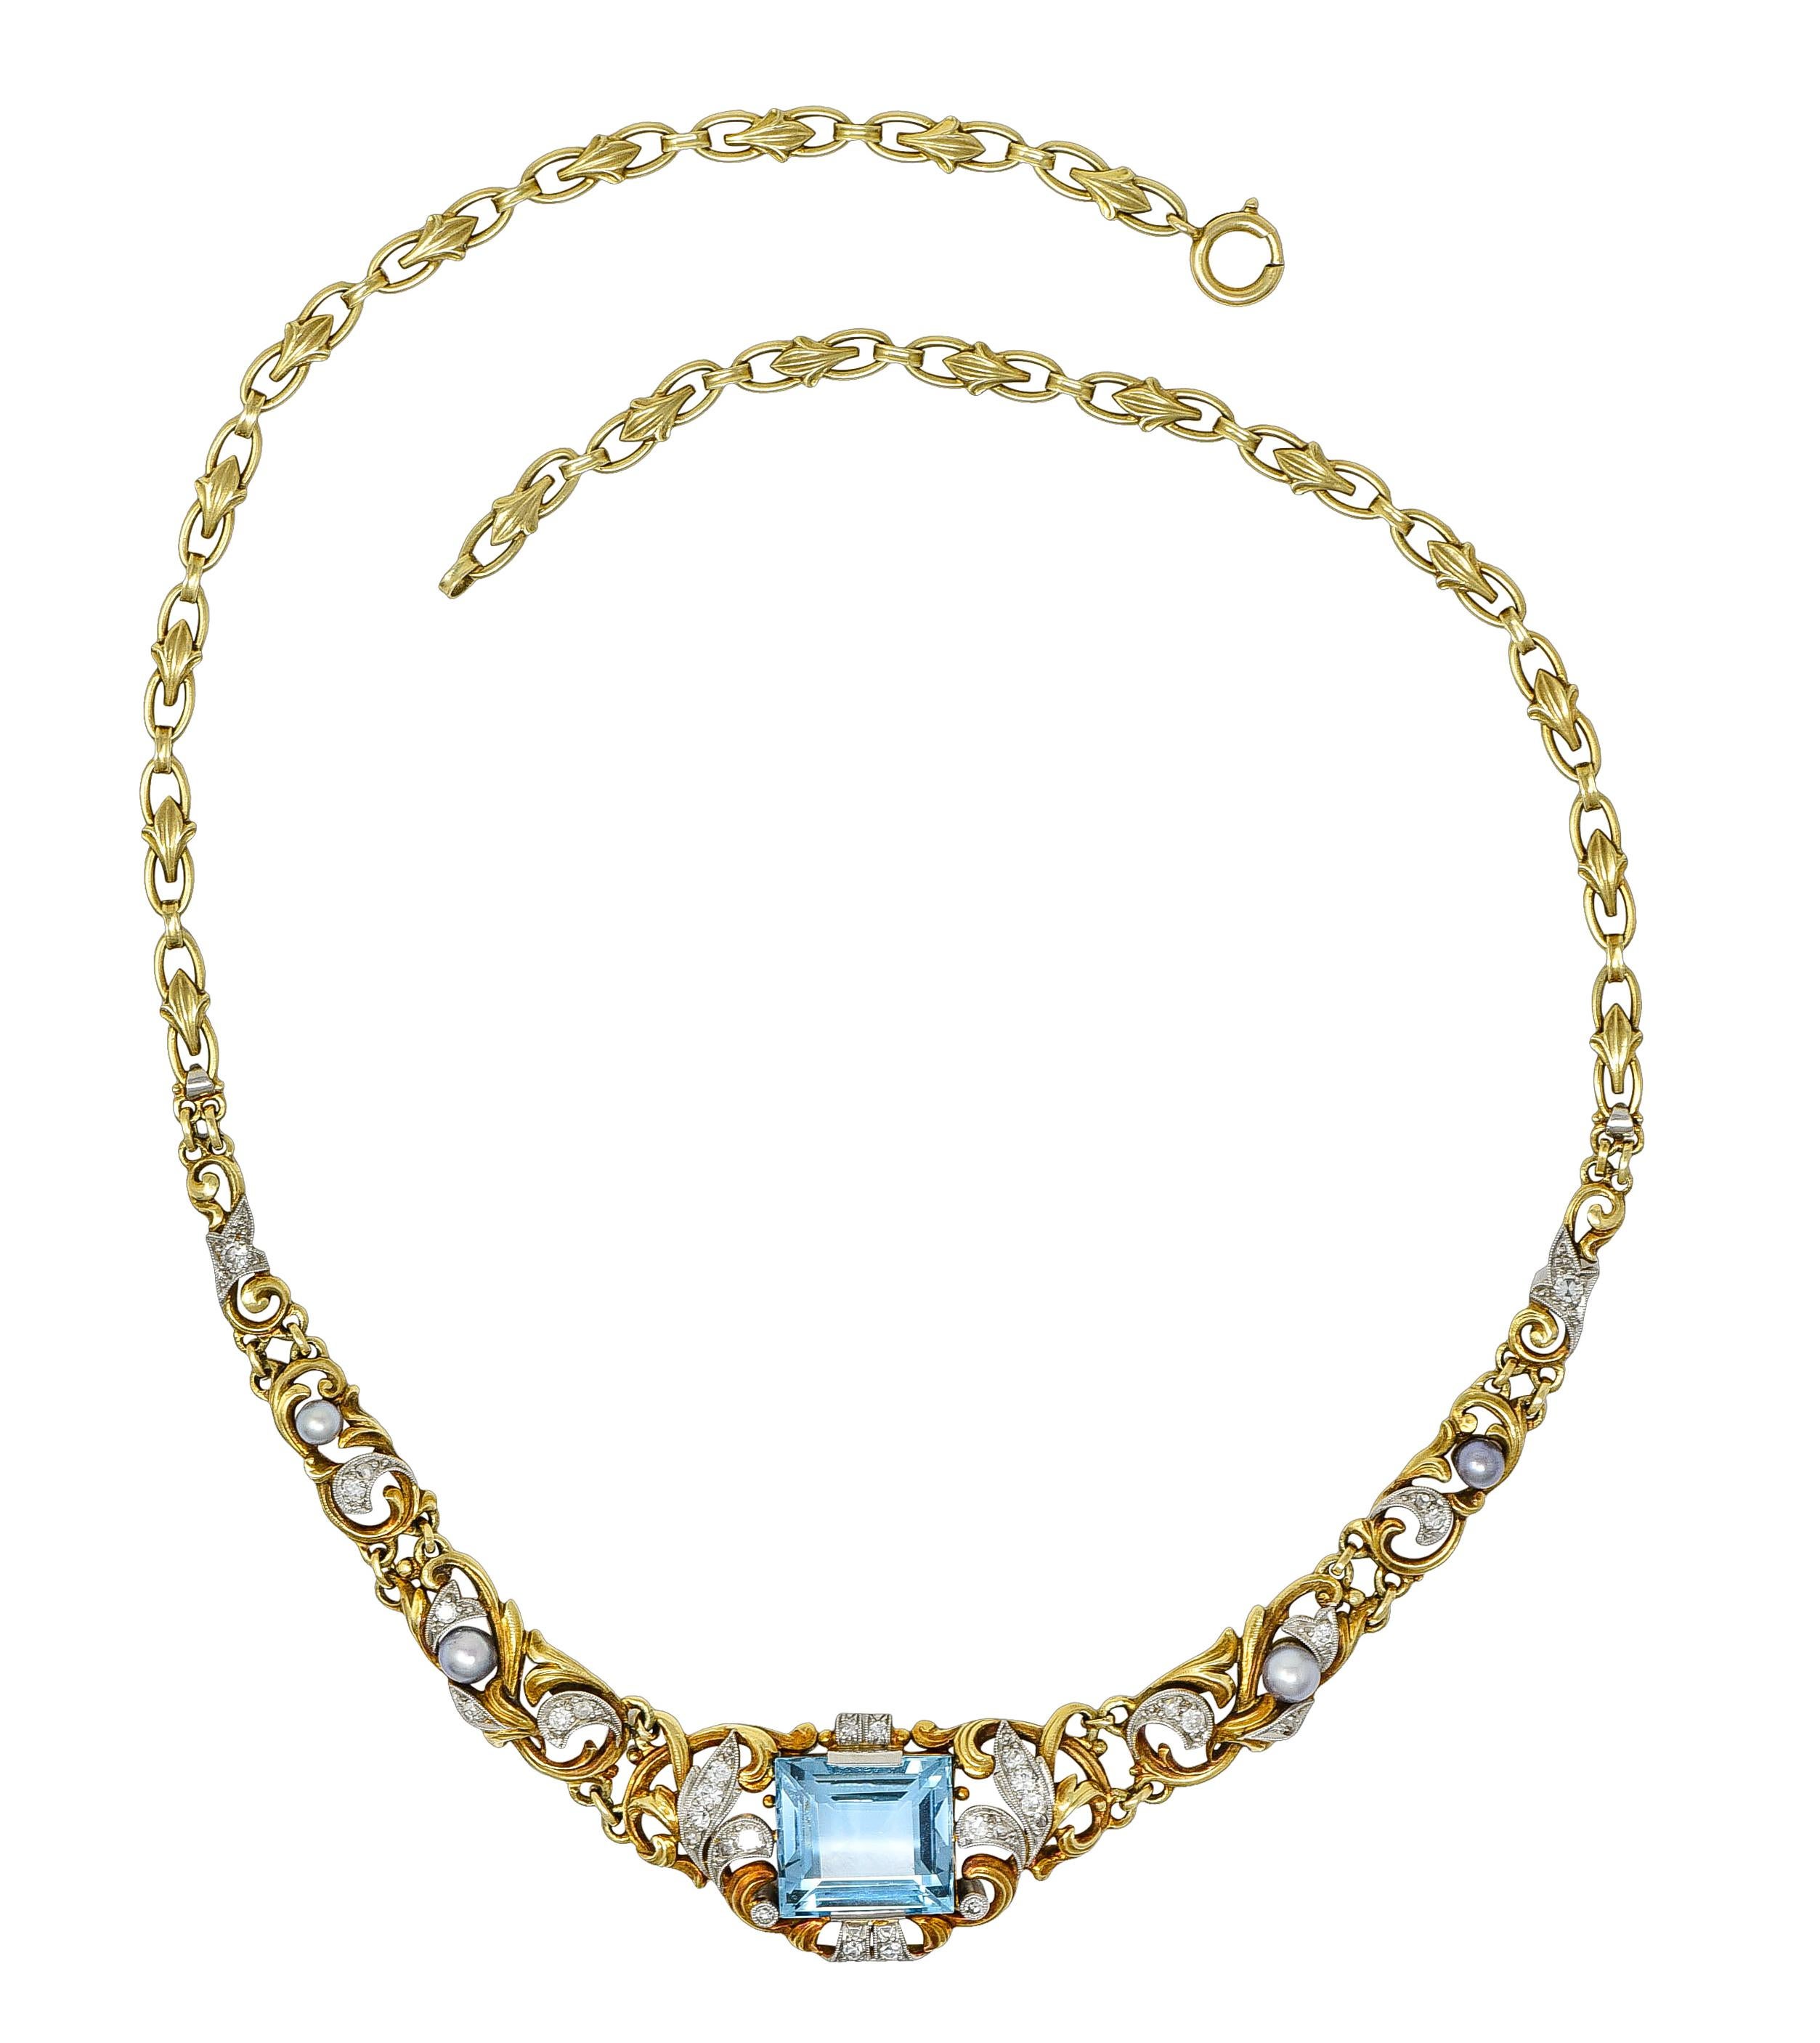 Designed as a stylized fleur-de-lis motif cable chain featuring a scrolling central station. Centering a step-cut aquamarine weighing approximately 9.06 carats total. Transparent blue in color with light saturation - tab set in ornate surround.